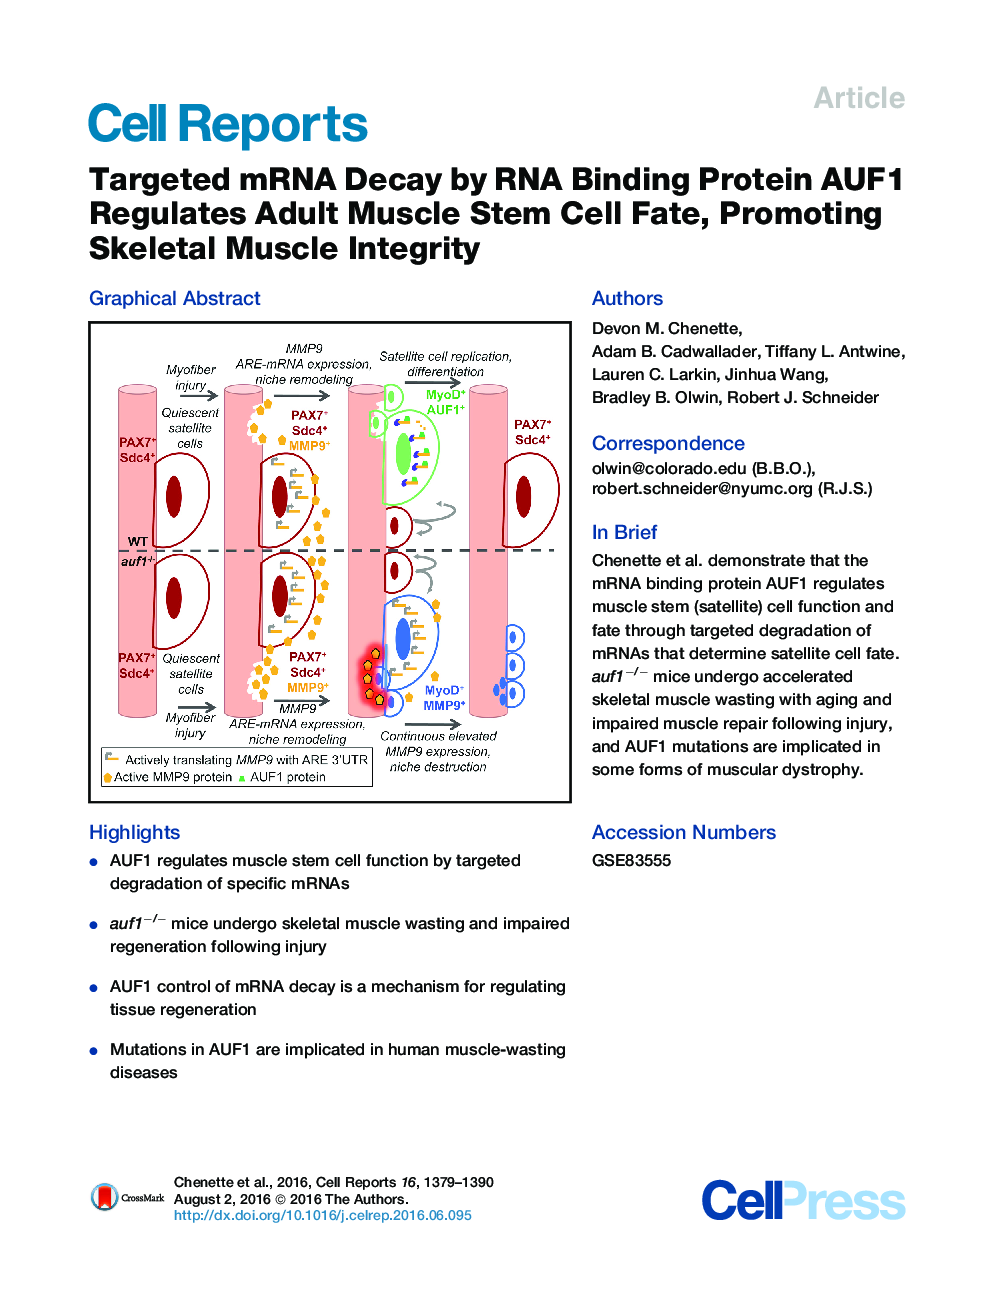 Targeted mRNA Decay by RNA Binding Protein AUF1 Regulates Adult Muscle Stem Cell Fate, Promoting Skeletal Muscle Integrity